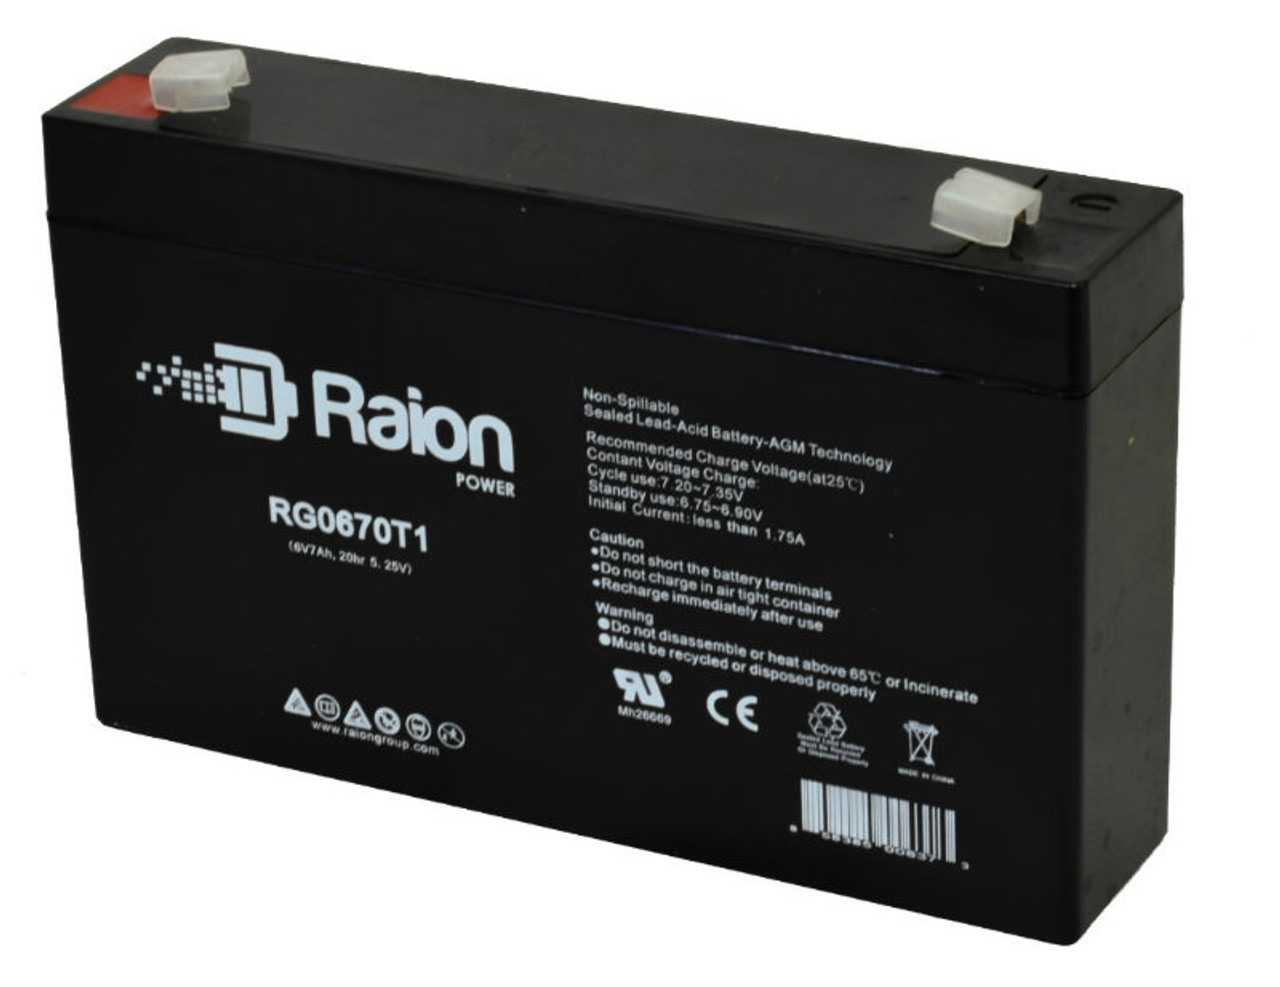 Raion Power RG0670T1 6V 7Ah Replacement Battery Cartridge for Pace Tech Inc. 911ST ECG MONITOR Medical Equipment